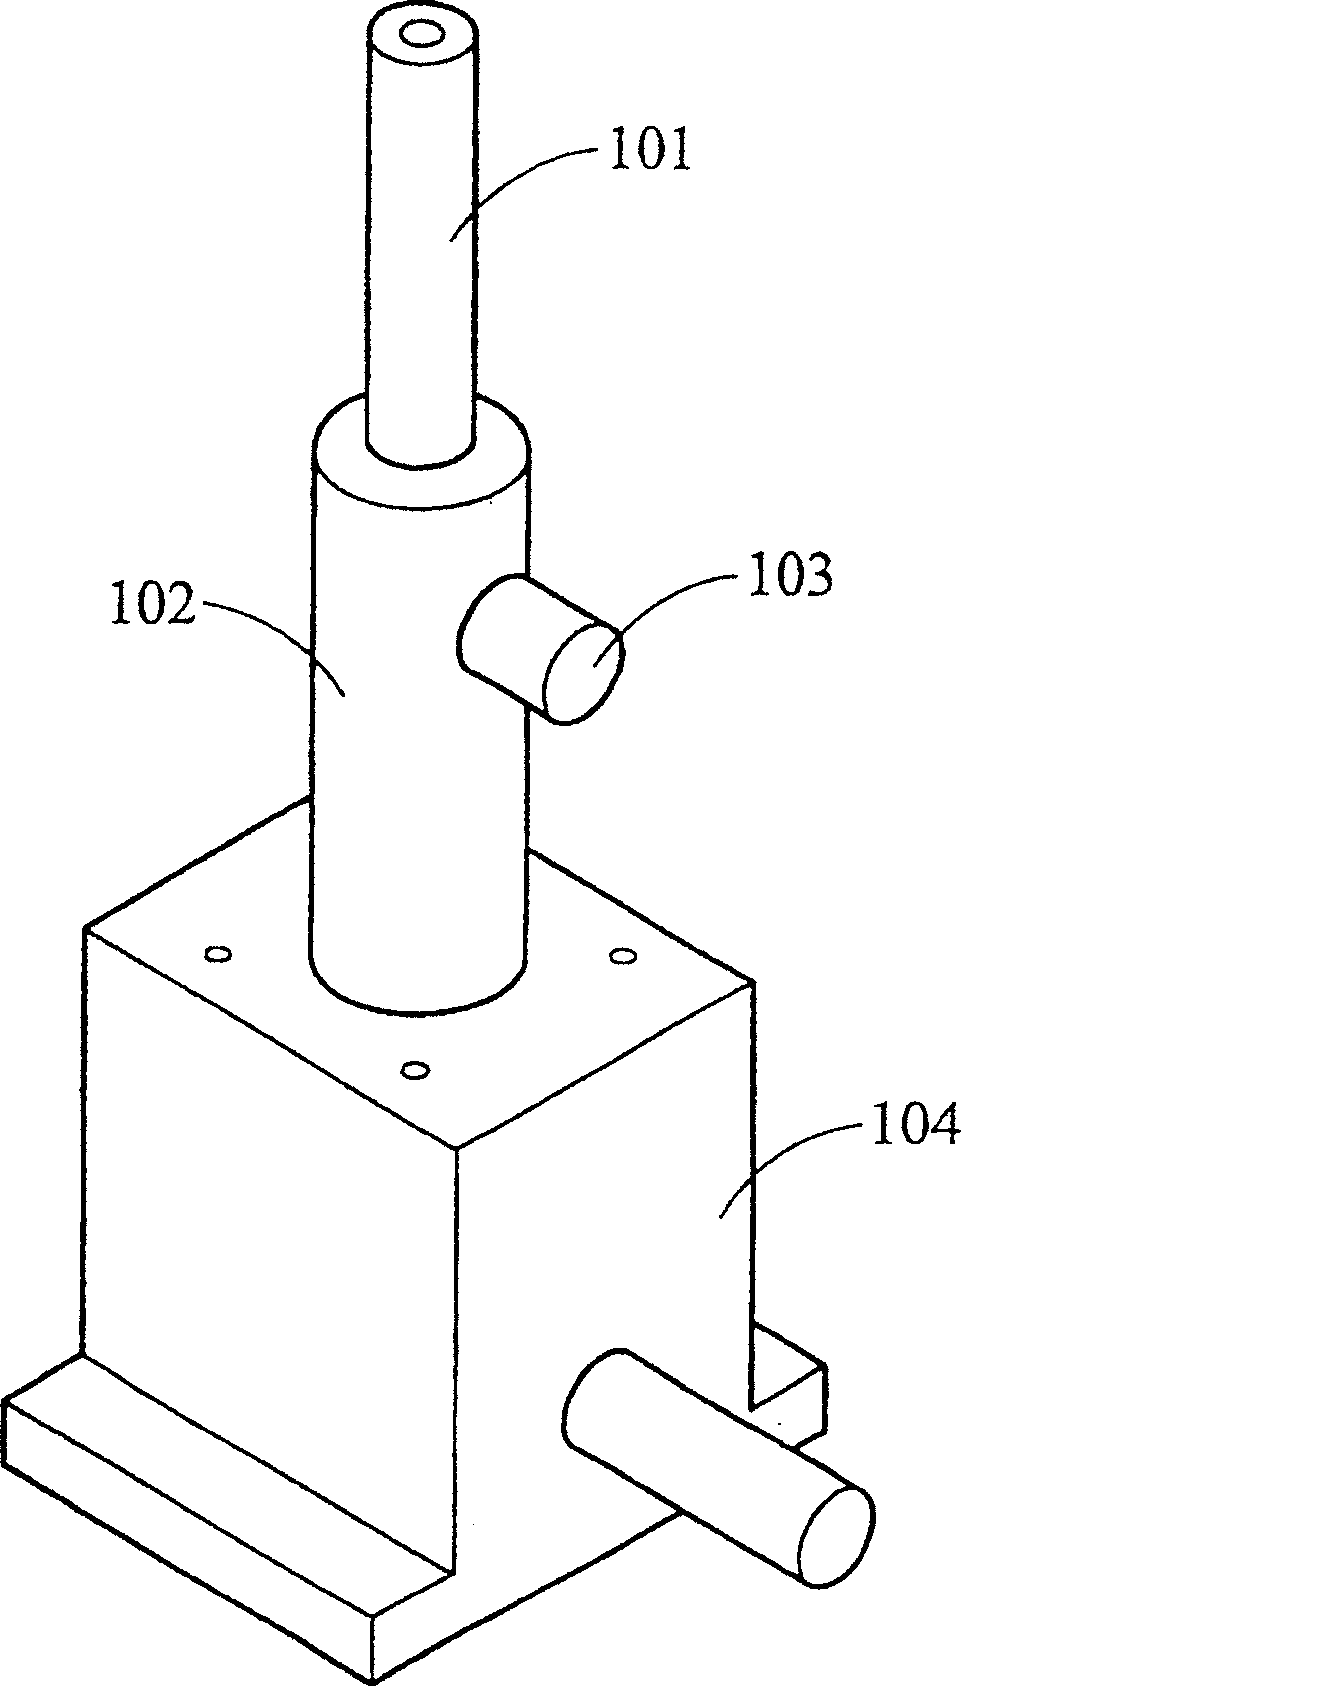 Optical height adjusting device